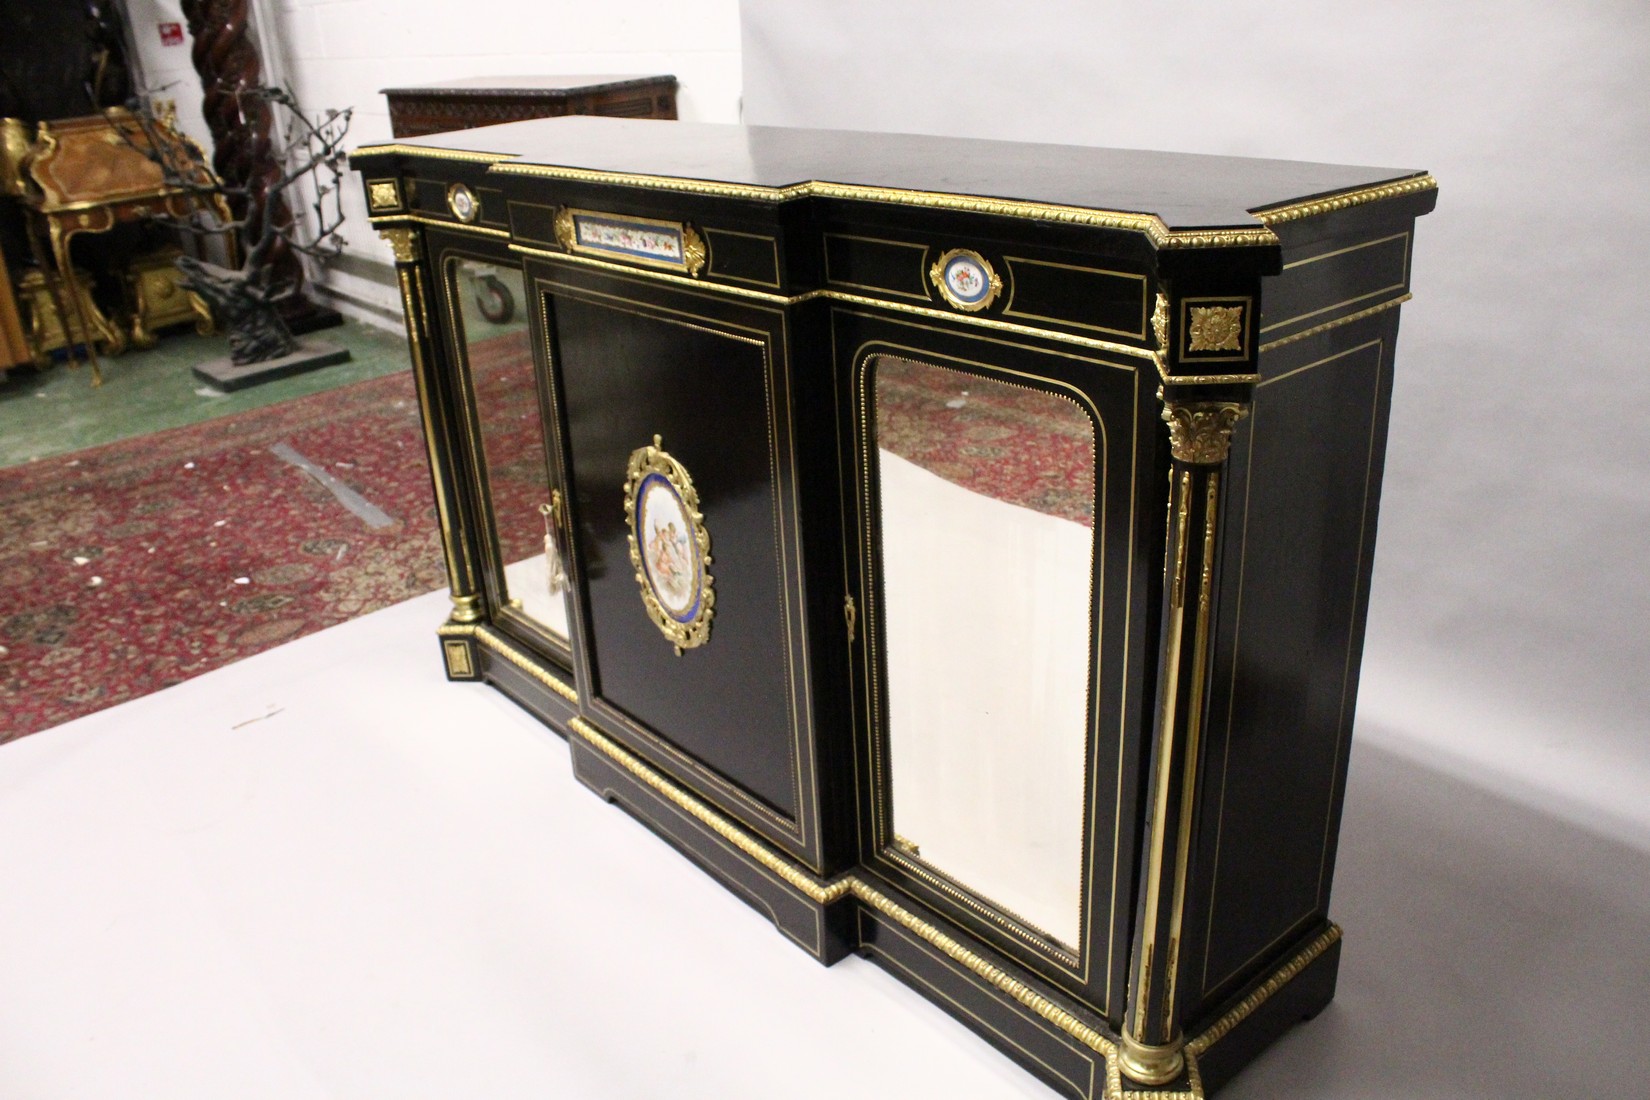 A VERY GOOD 19TH CENTURY FRENCH EBONY BREAK FRONT CREDENZA, with ornate mounts inset with Sevres - Image 4 of 6